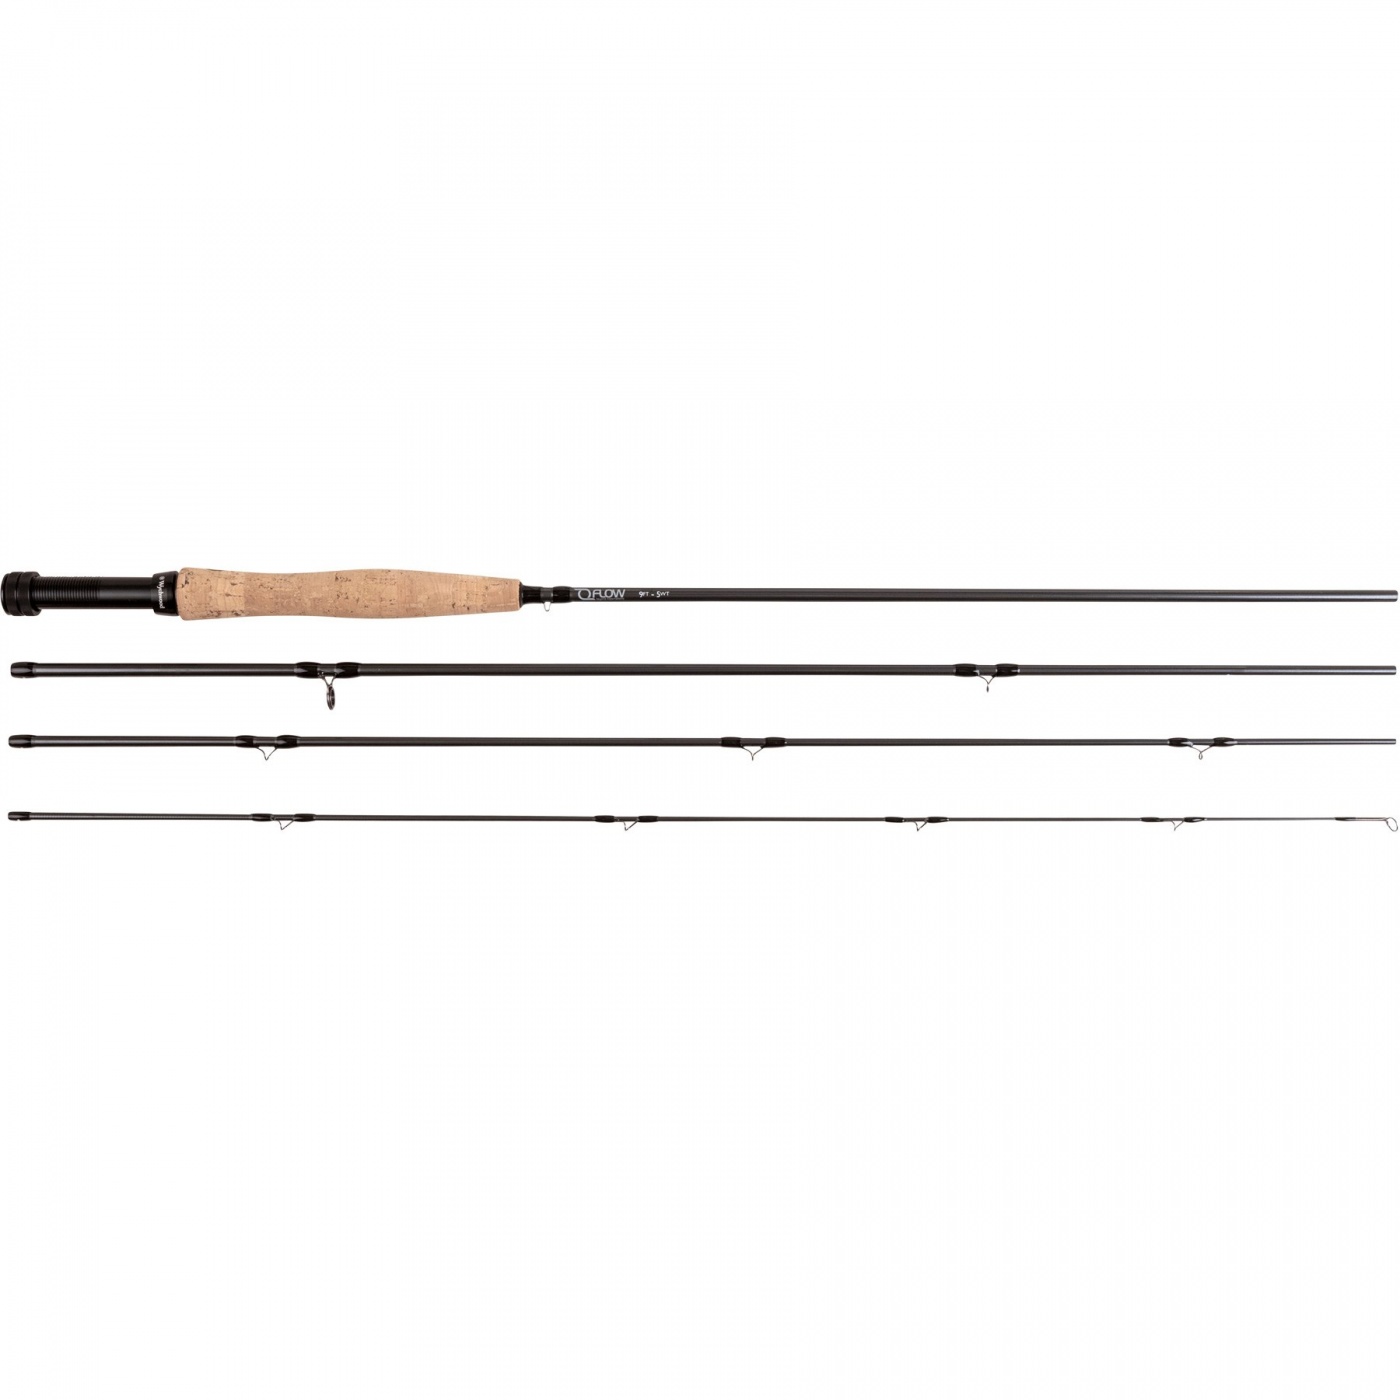 Wychwood Flow Fly Rod 11' #4 Fly Fishing Rod For Trout